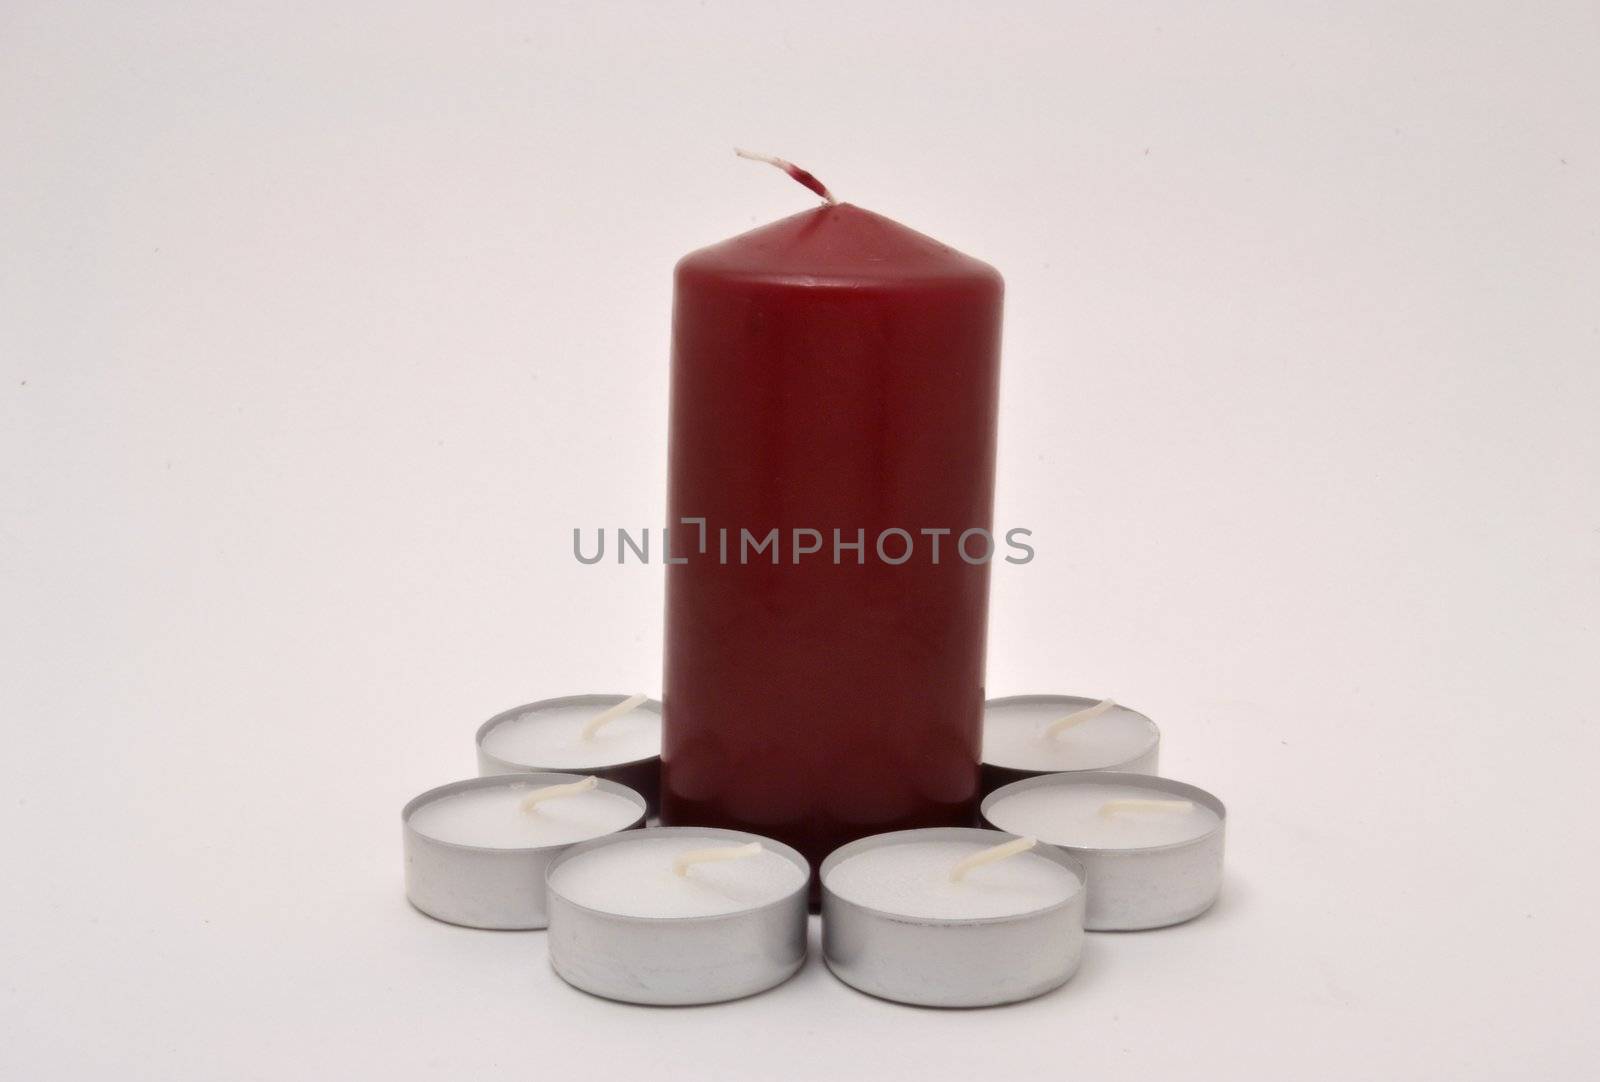 The candles by Autre